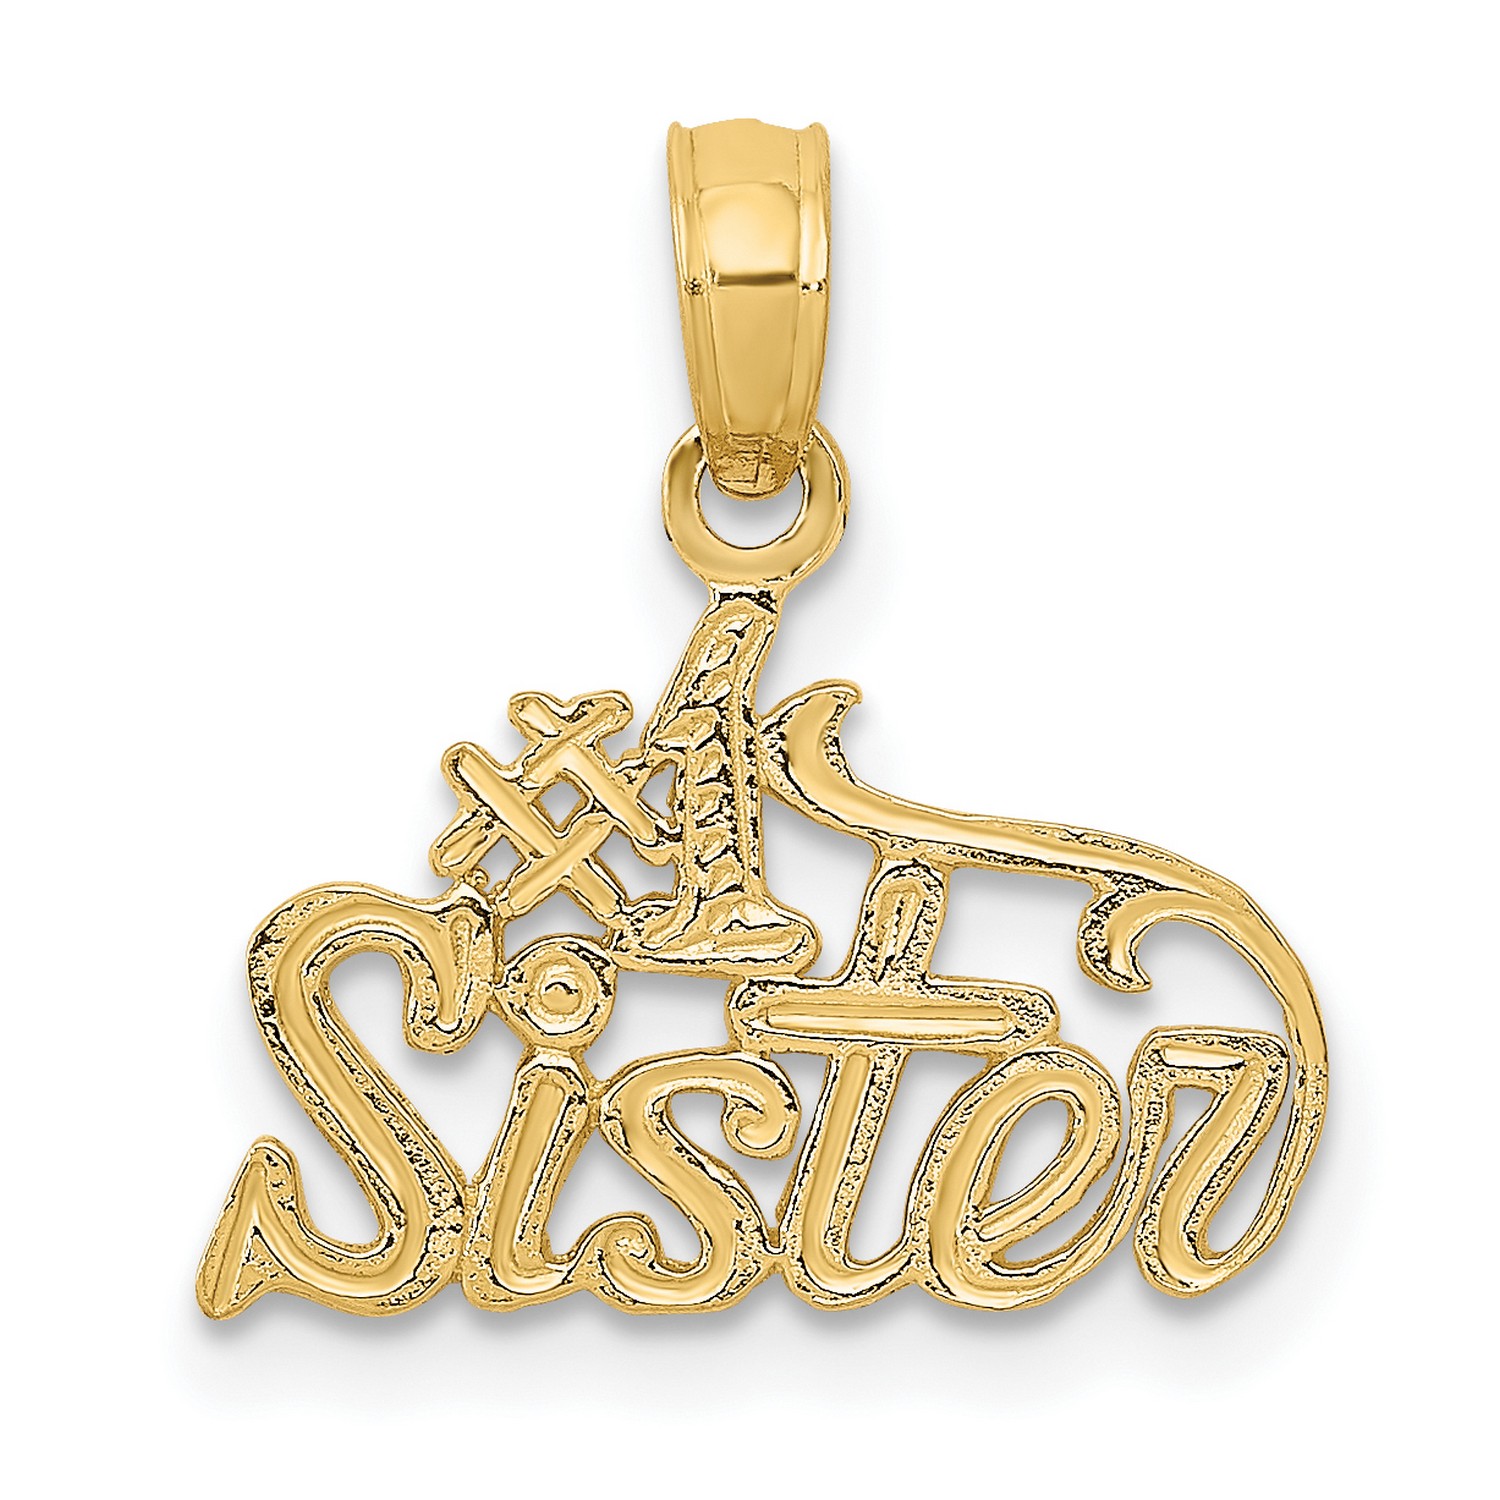 15mm x 16mm Solid 14k Yellow Gold #1 Sister Pendant